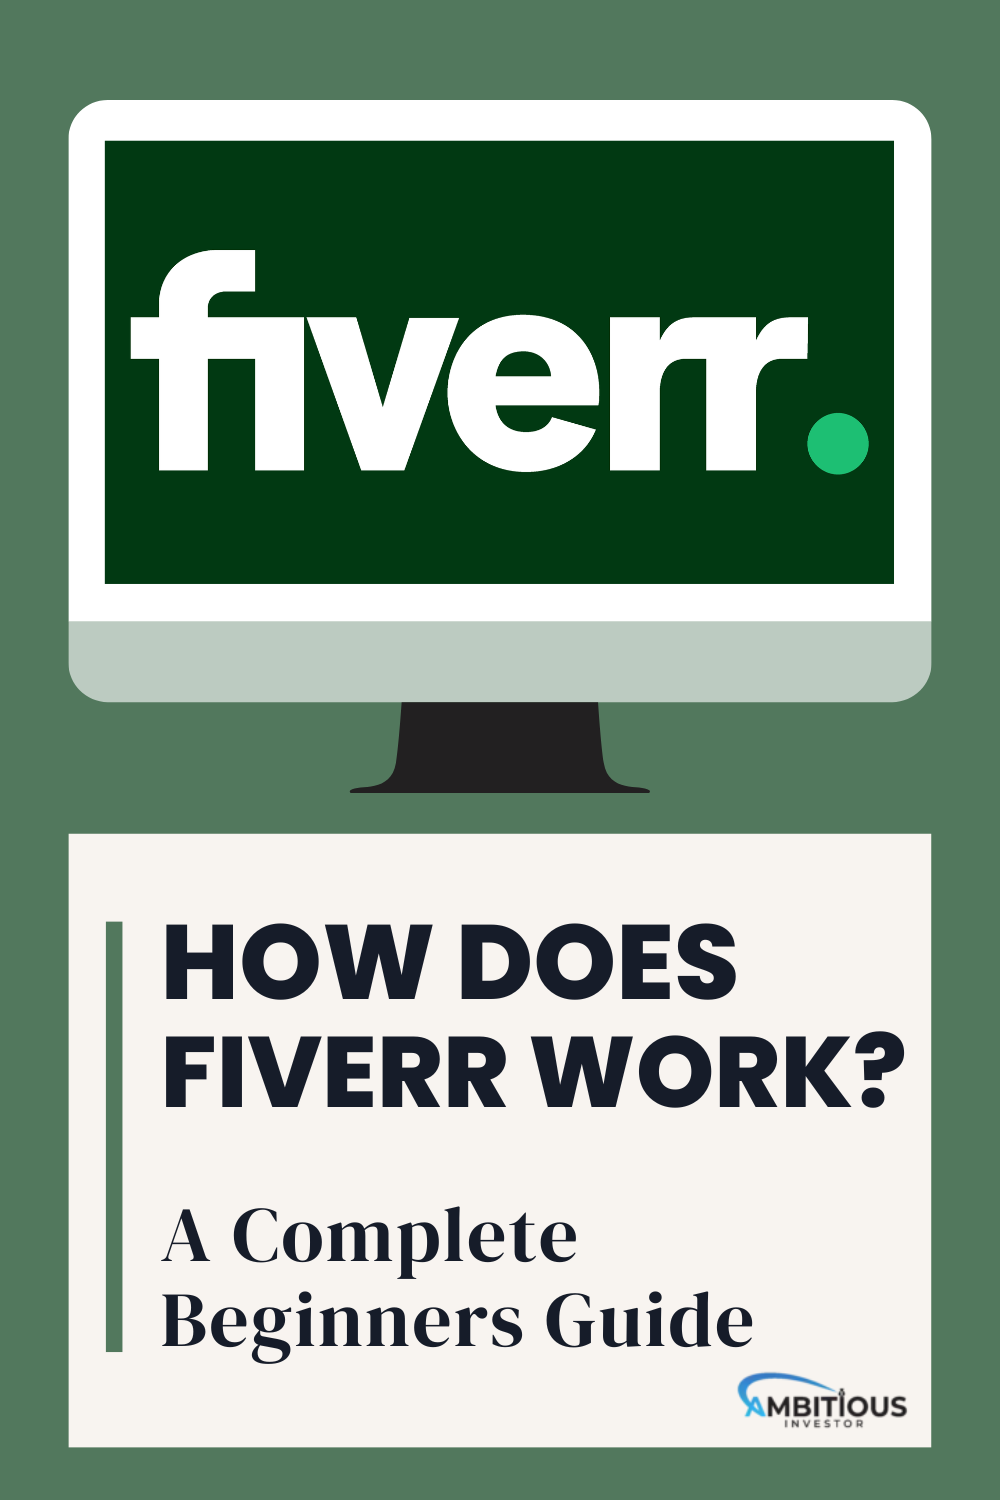 How Does Fiverr Work – A Complete Beginners Guide